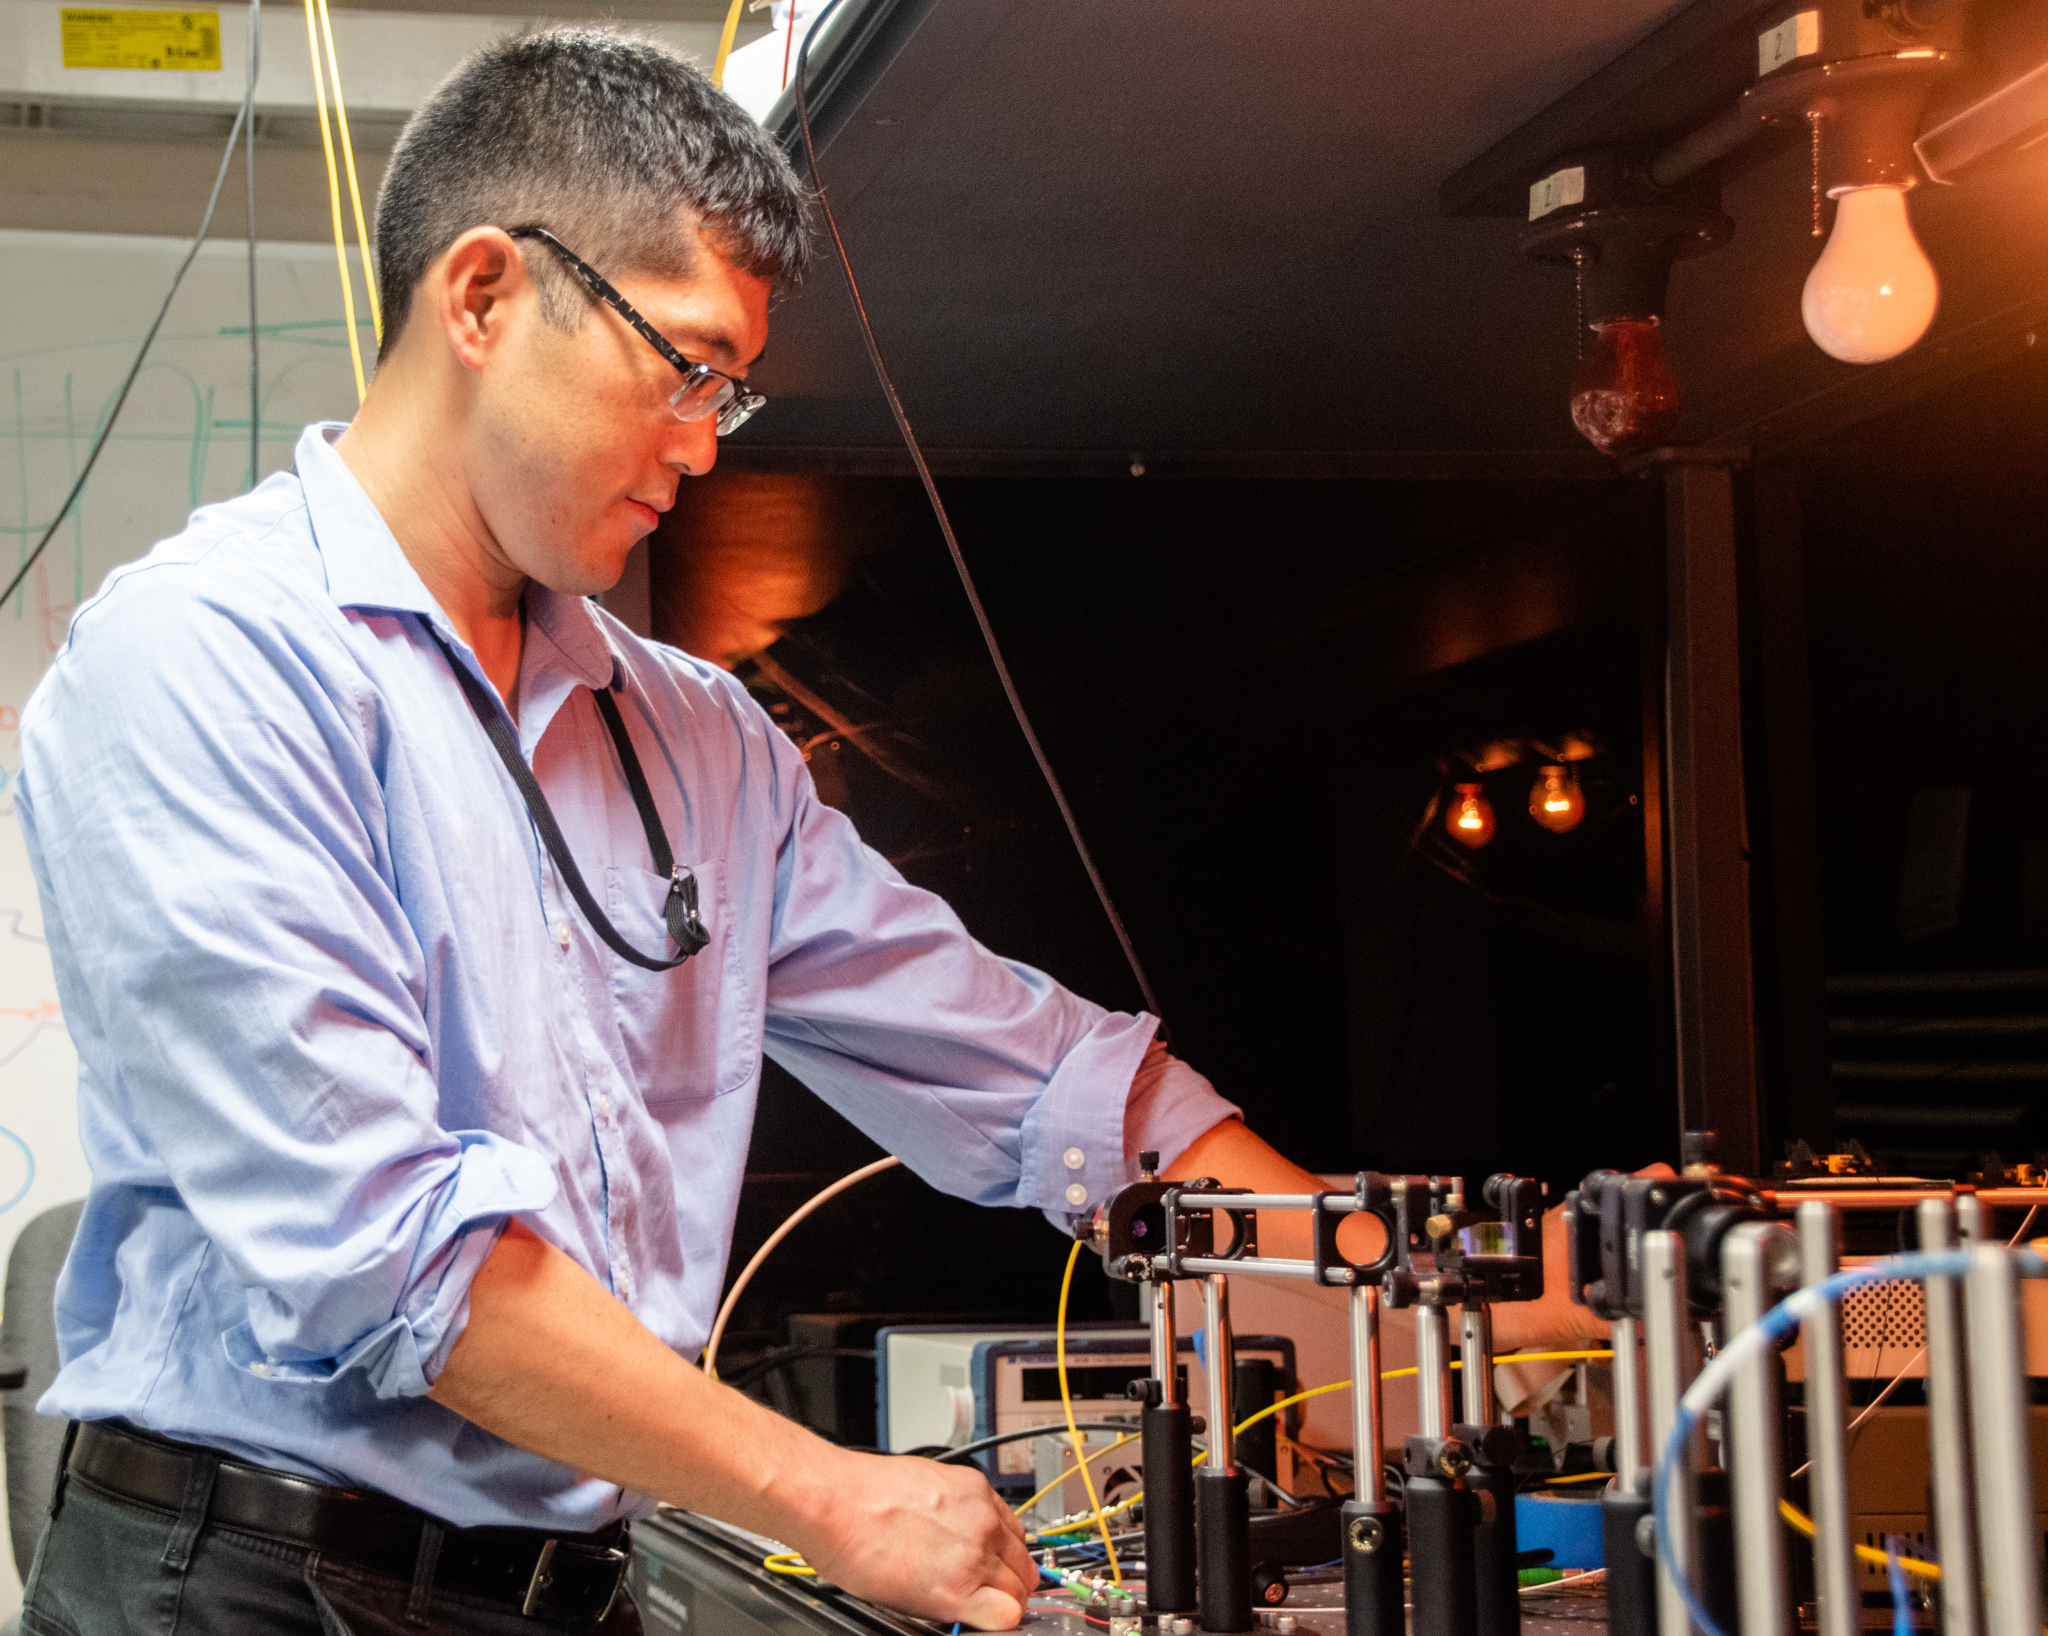 Space Communications and Navigation intern, Ryan Hashi, tests equipment in the Quantum Communications Lab at NASA’s Glenn Research Center.